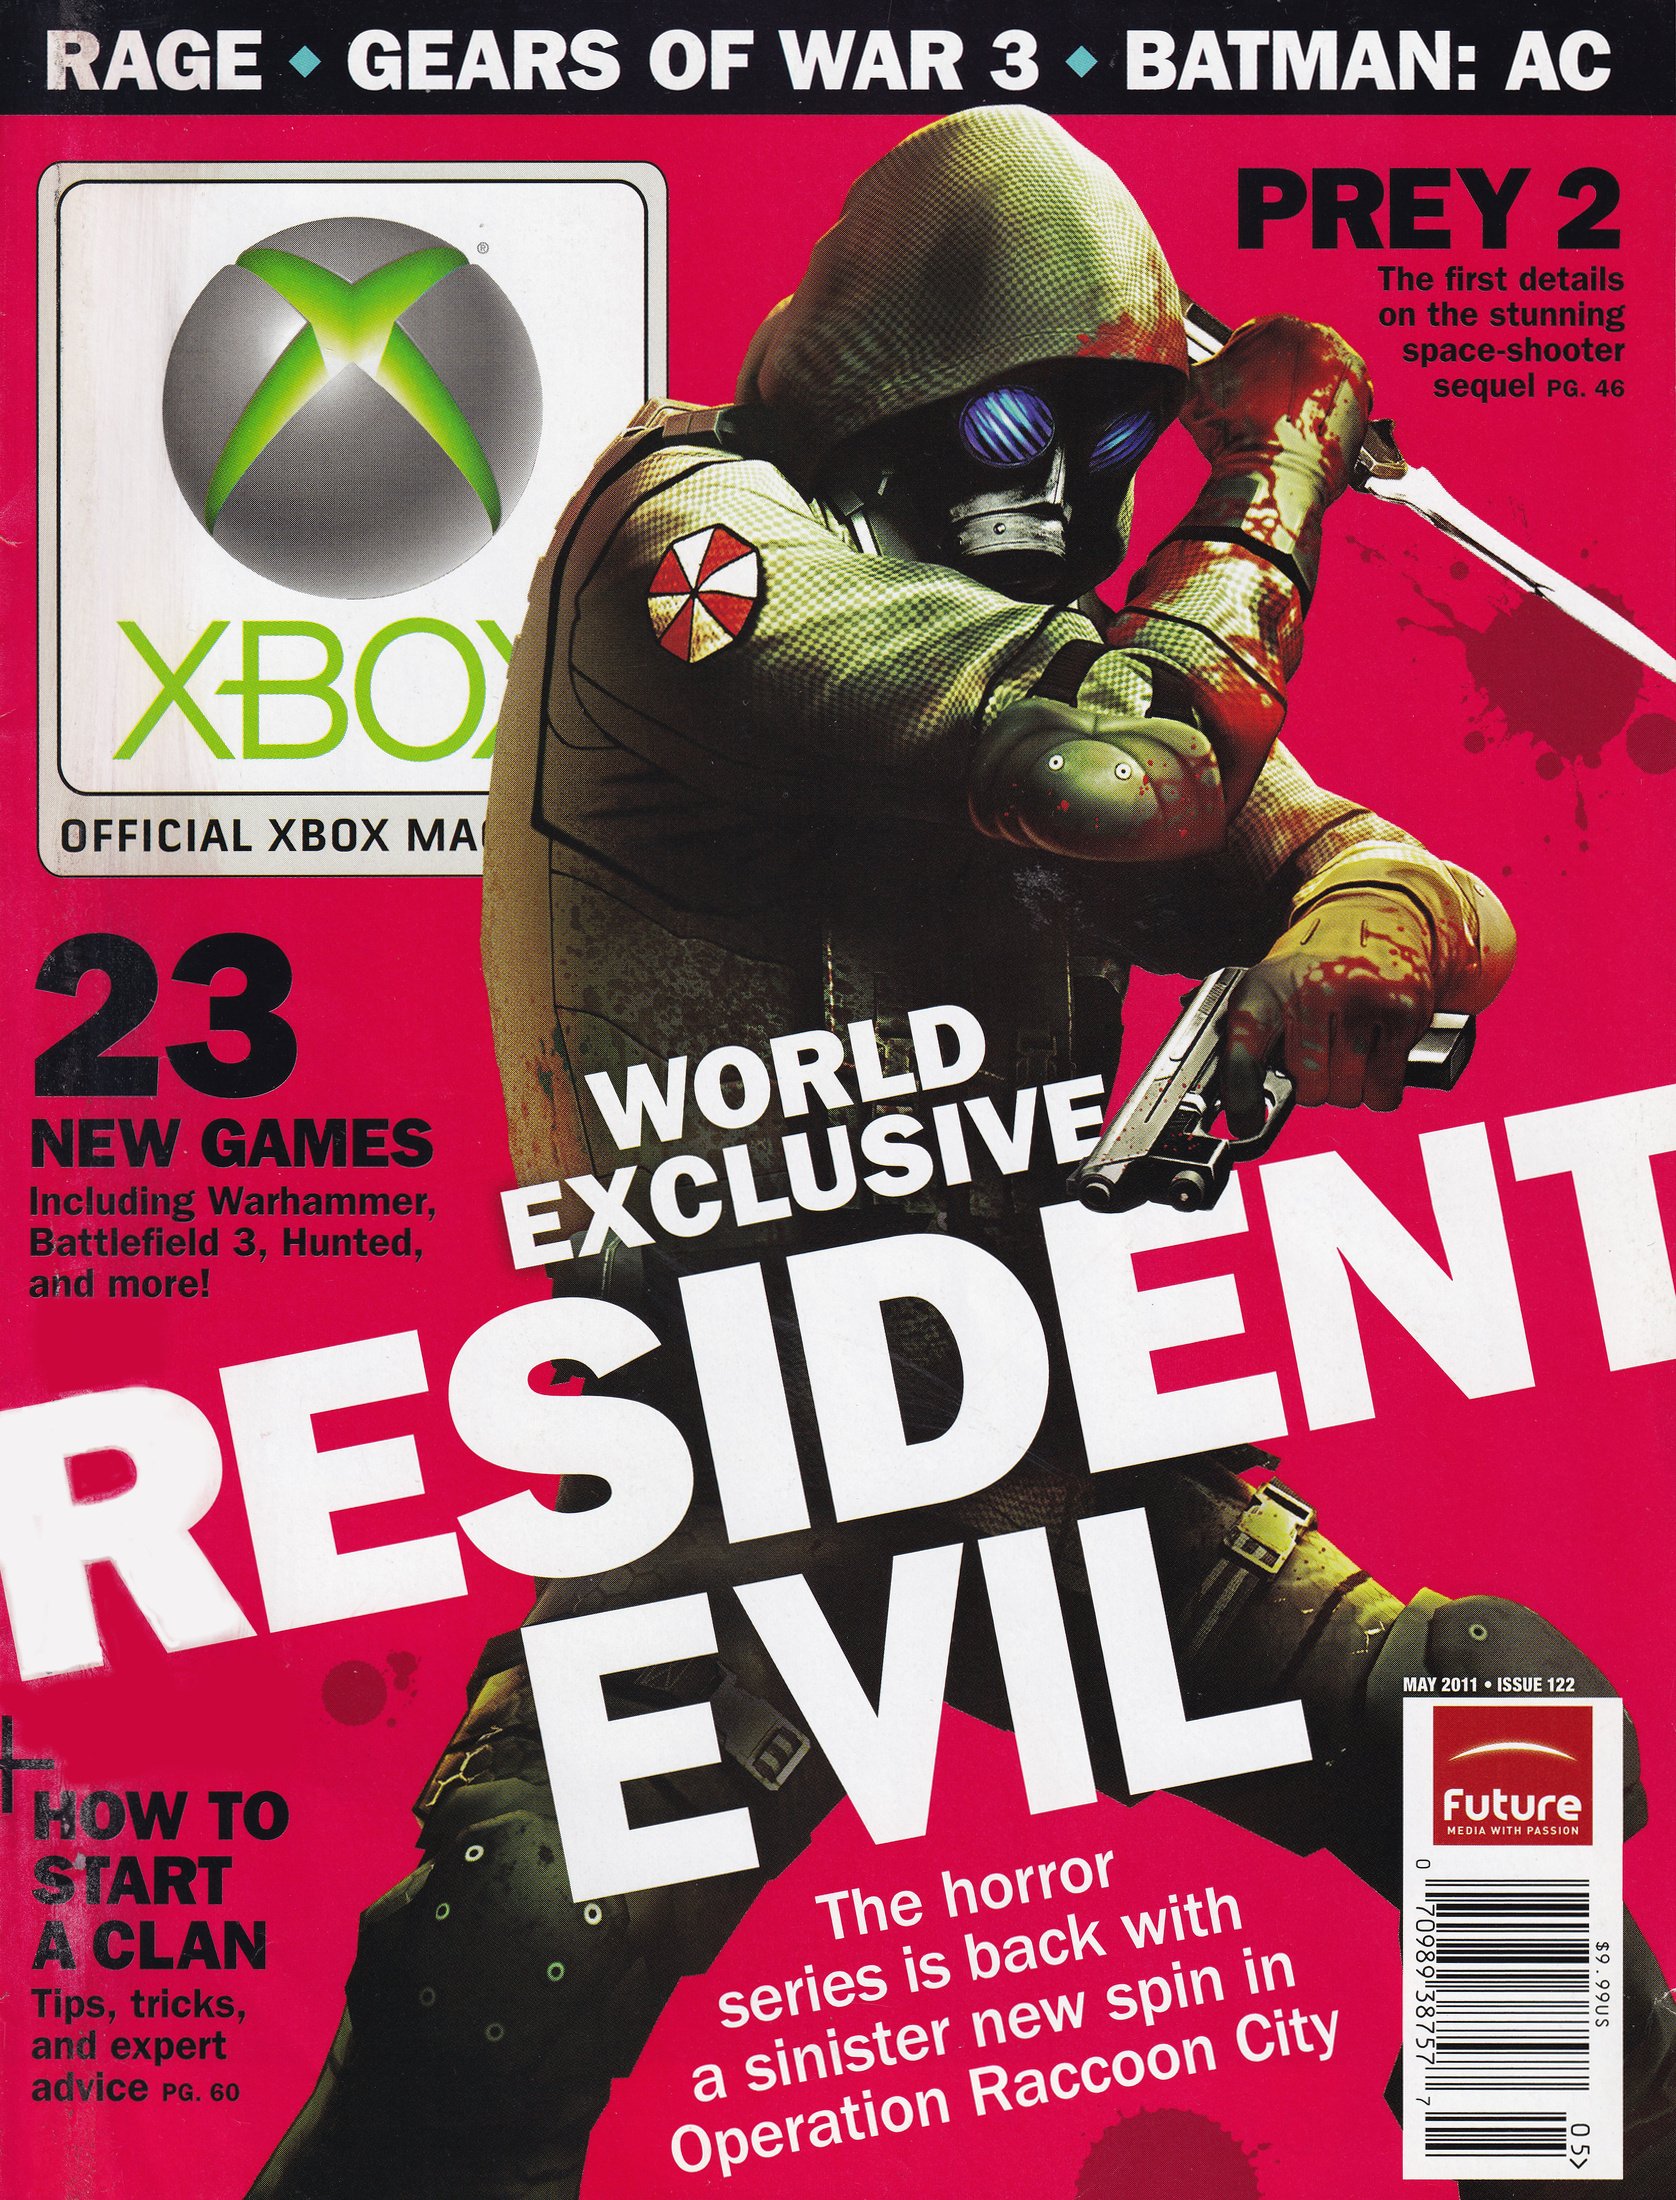 Official Xbox Magazine Issue 122 (May 2011)